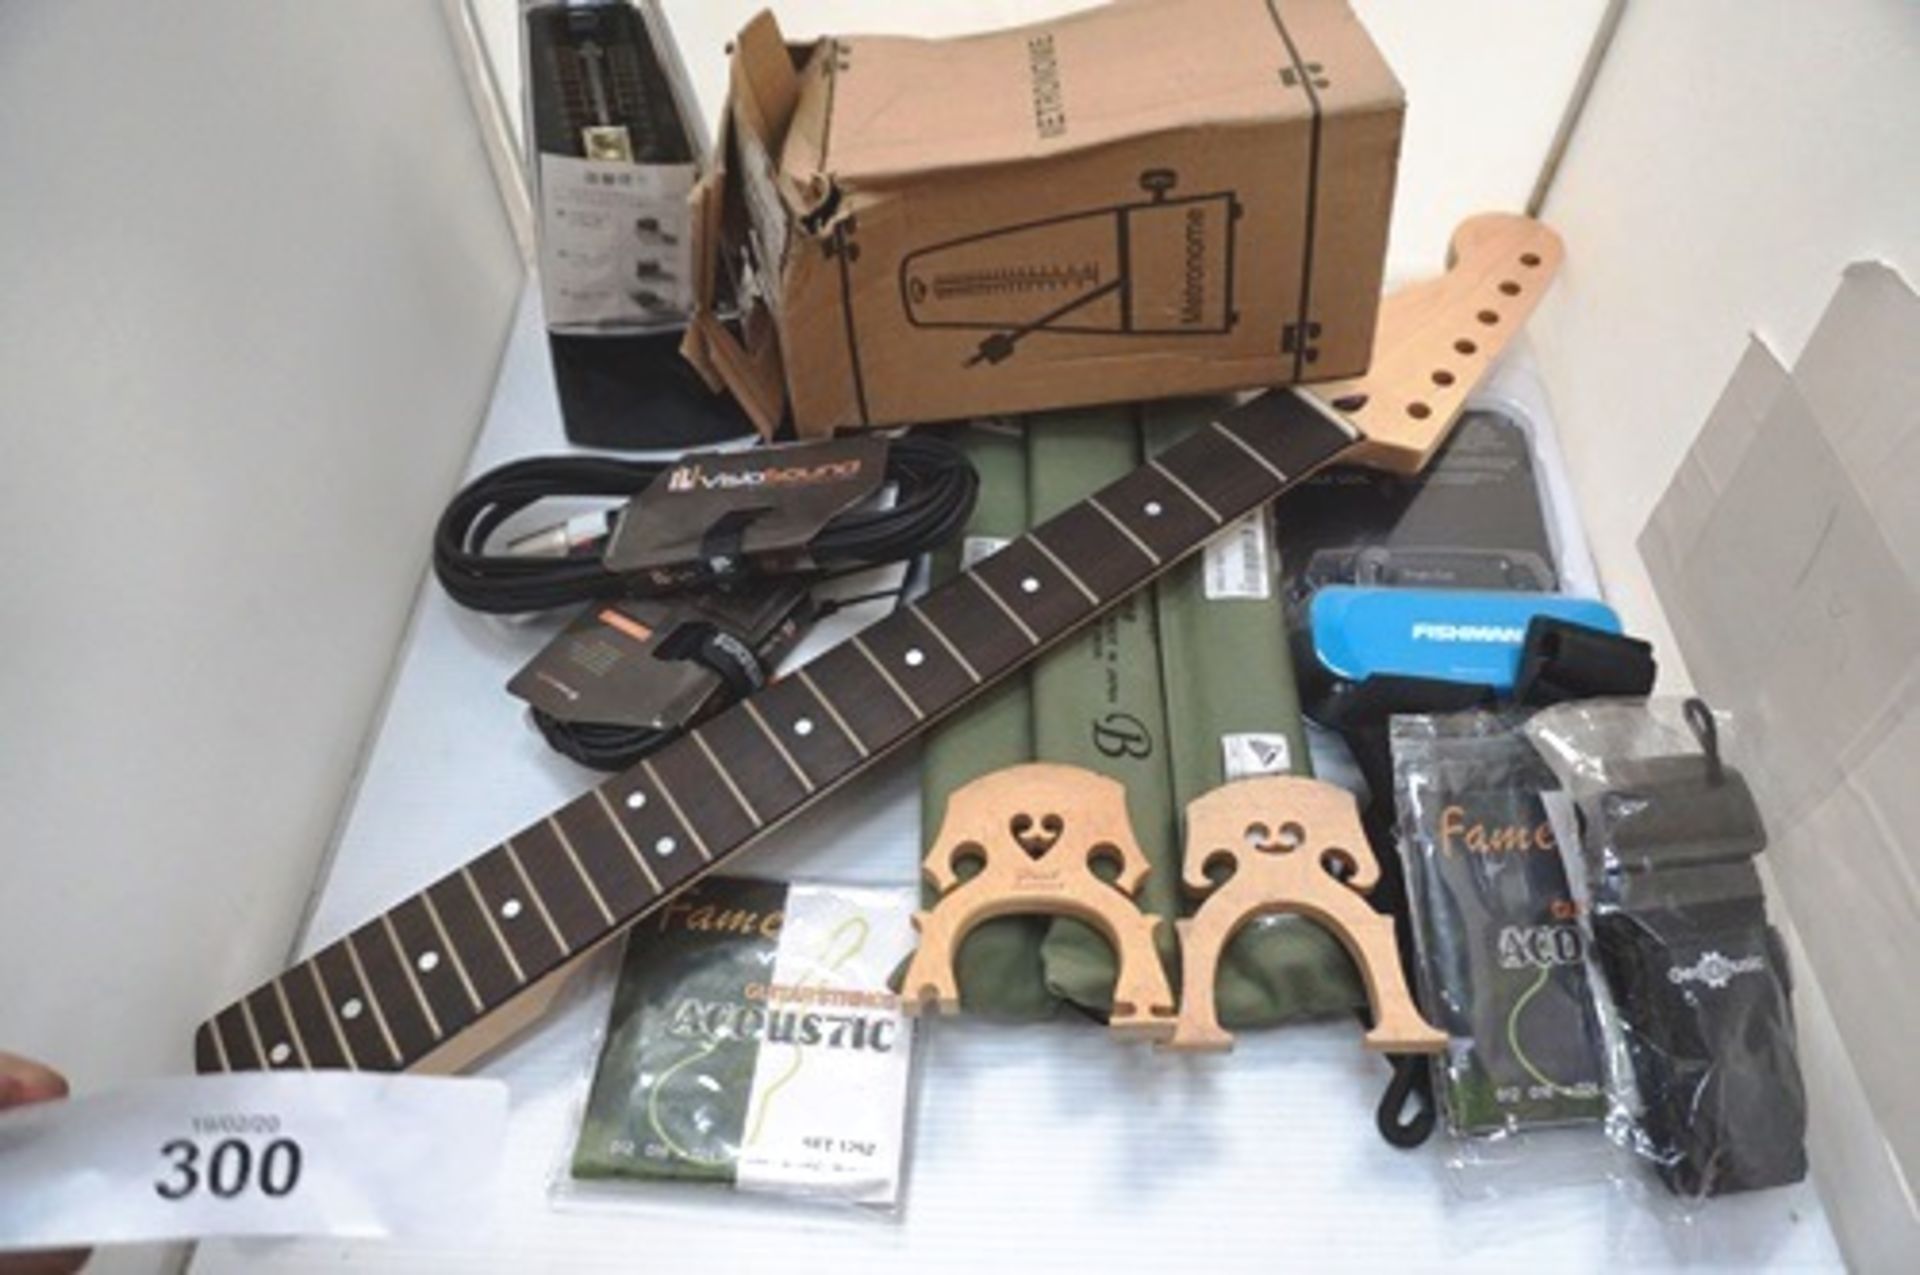 3 x Yamaha soprano recorders, together with an ID acoustic guitar pickup, electric guitar neck, - Image 2 of 2